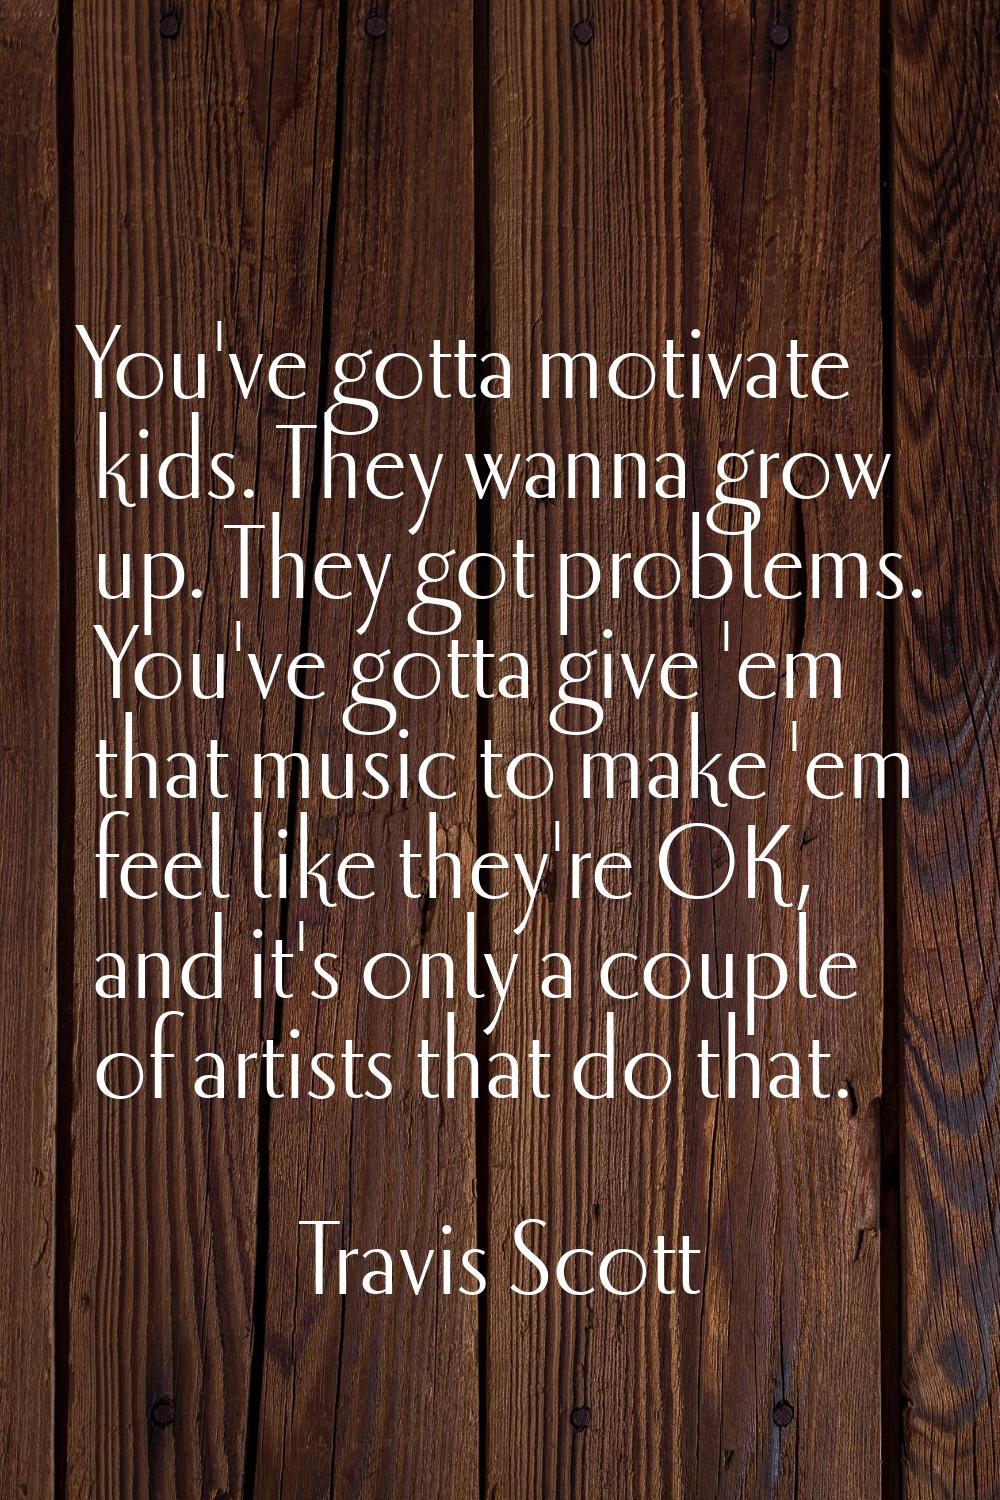 You've gotta motivate kids. They wanna grow up. They got problems. You've gotta give 'em that music